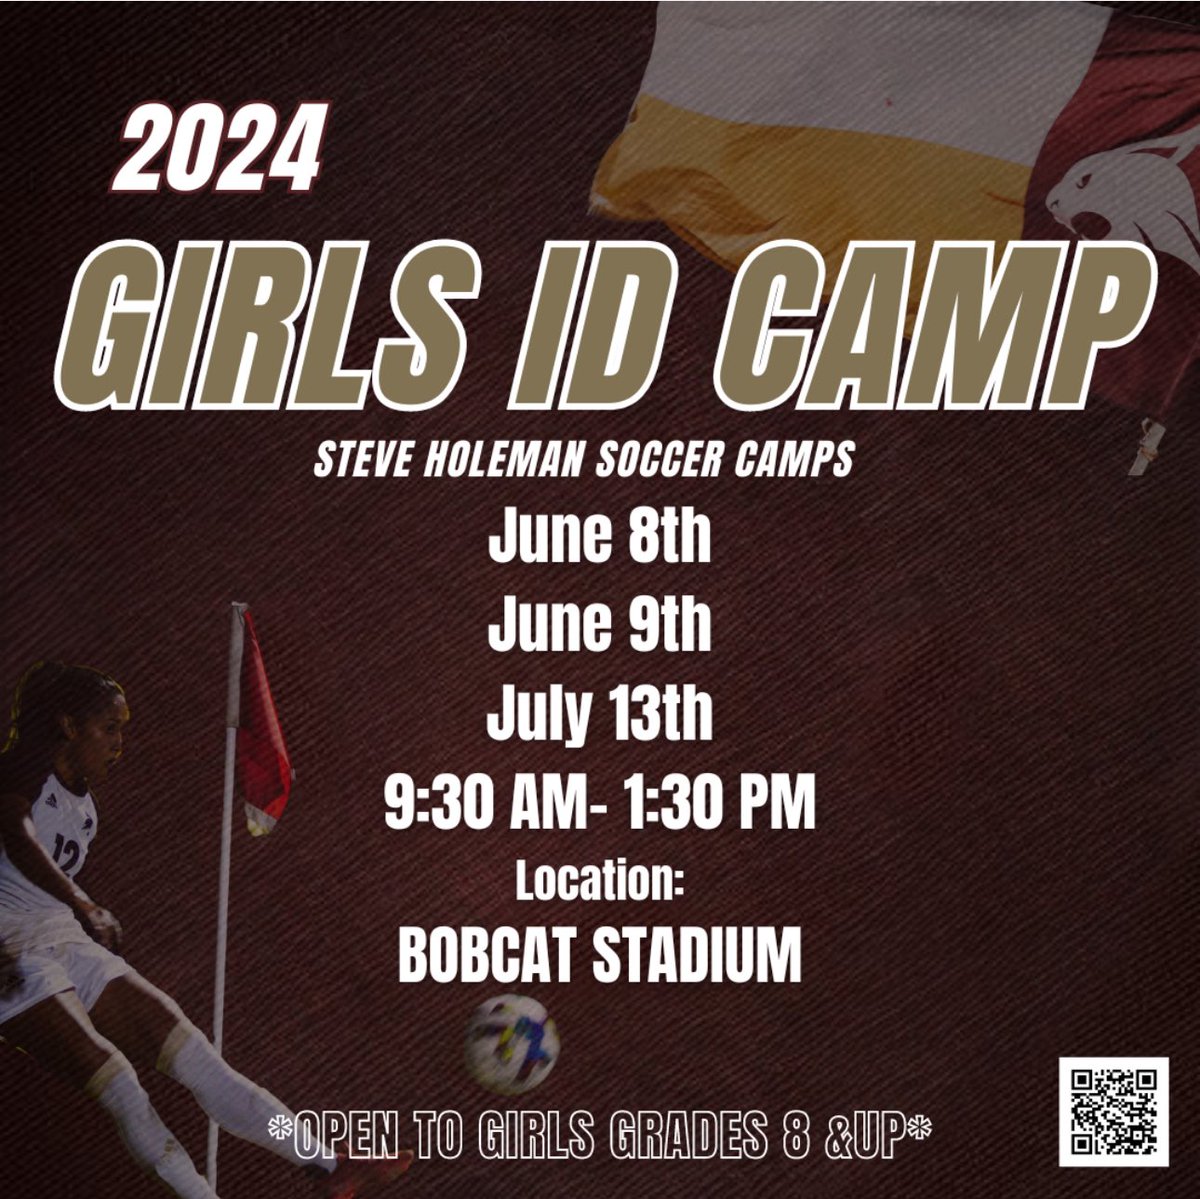 🚨Summer ID Camps🚨 🗓️June 8th, June 9th, July 13th ⌚️9:30am-1:30pm 👥 Girls 8th Grade and up 📍 Bobcat Soccer Complex, San Marcos 💻 steveholemansoccercamps.com